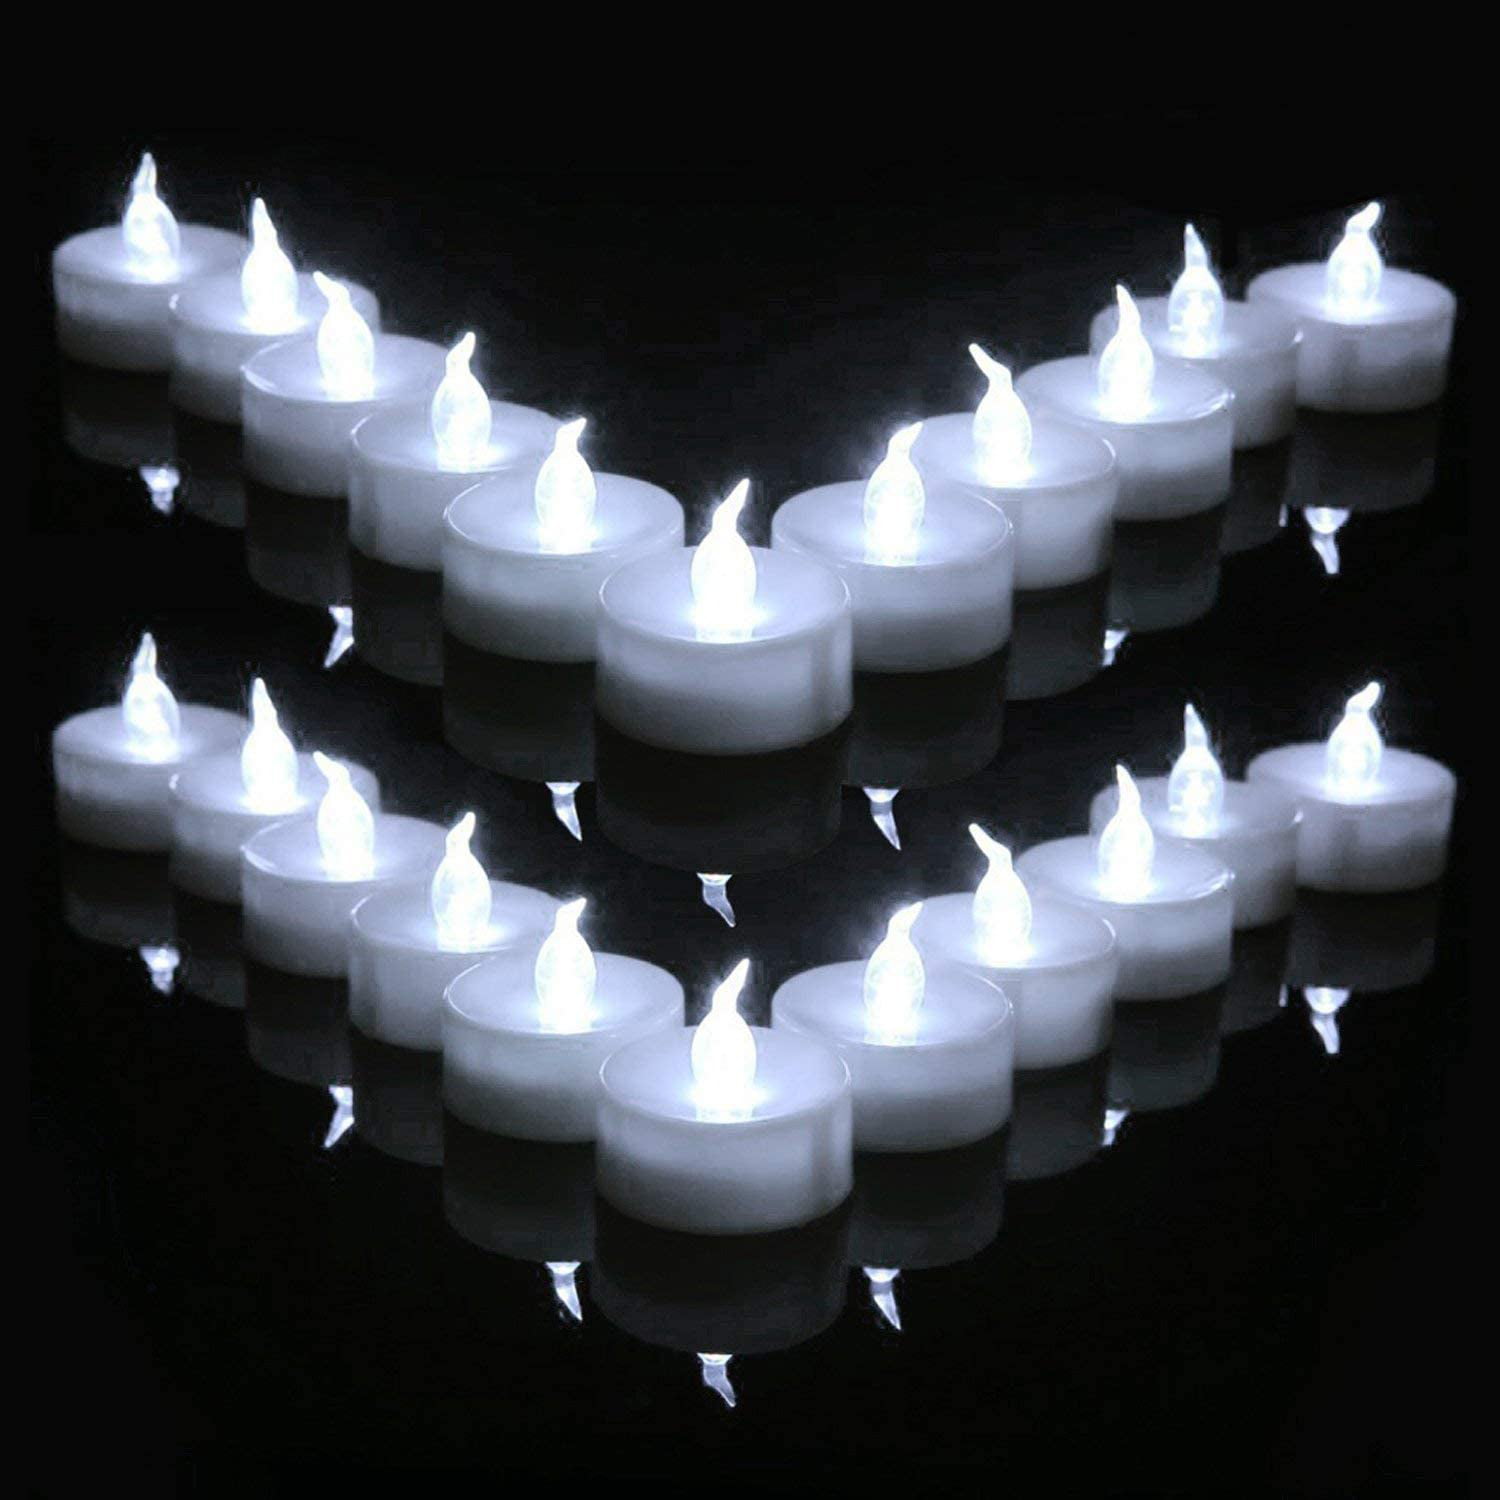 Seven Color Light Yarnow 24pcs Flameless LED Tea Light Candles Battery Powered Realistic Realistic Flickering Bulb for Birthday Wedding Mother Day Party Decoration 